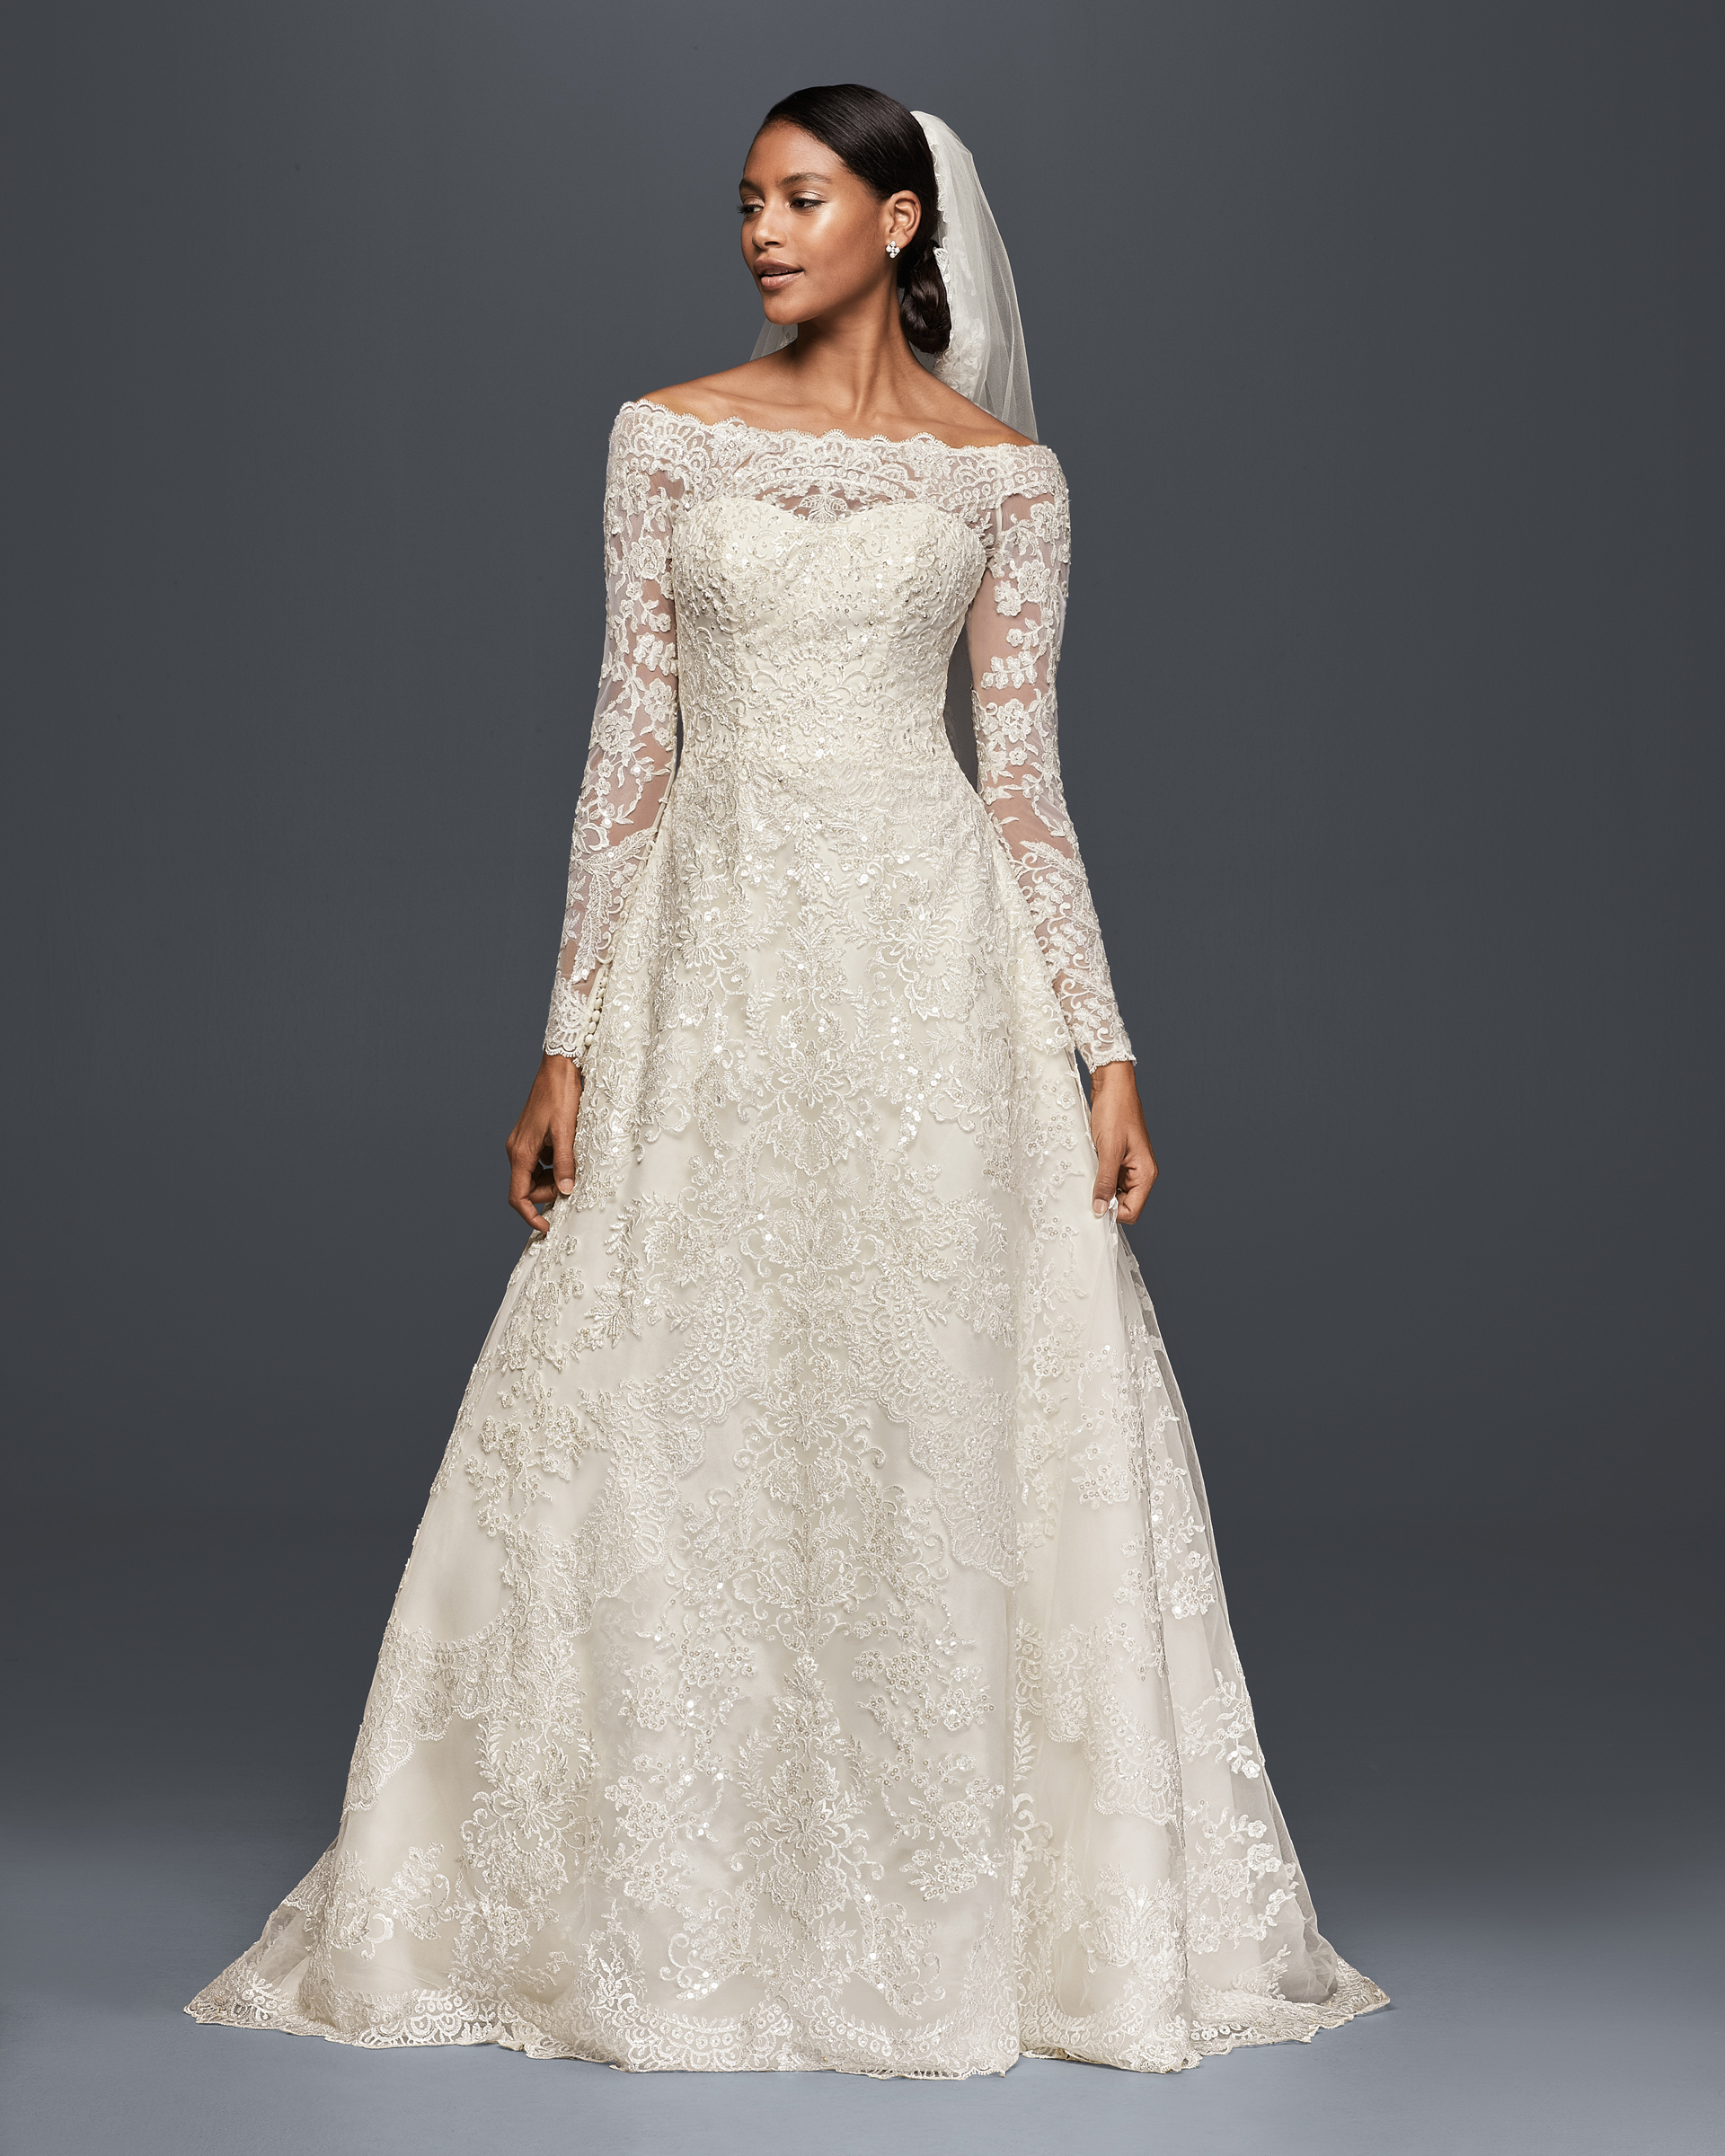 Bride in Meghan Markle wedding dress look a like A-line gown with off-the-shoulder neckline and long lace sleeves.